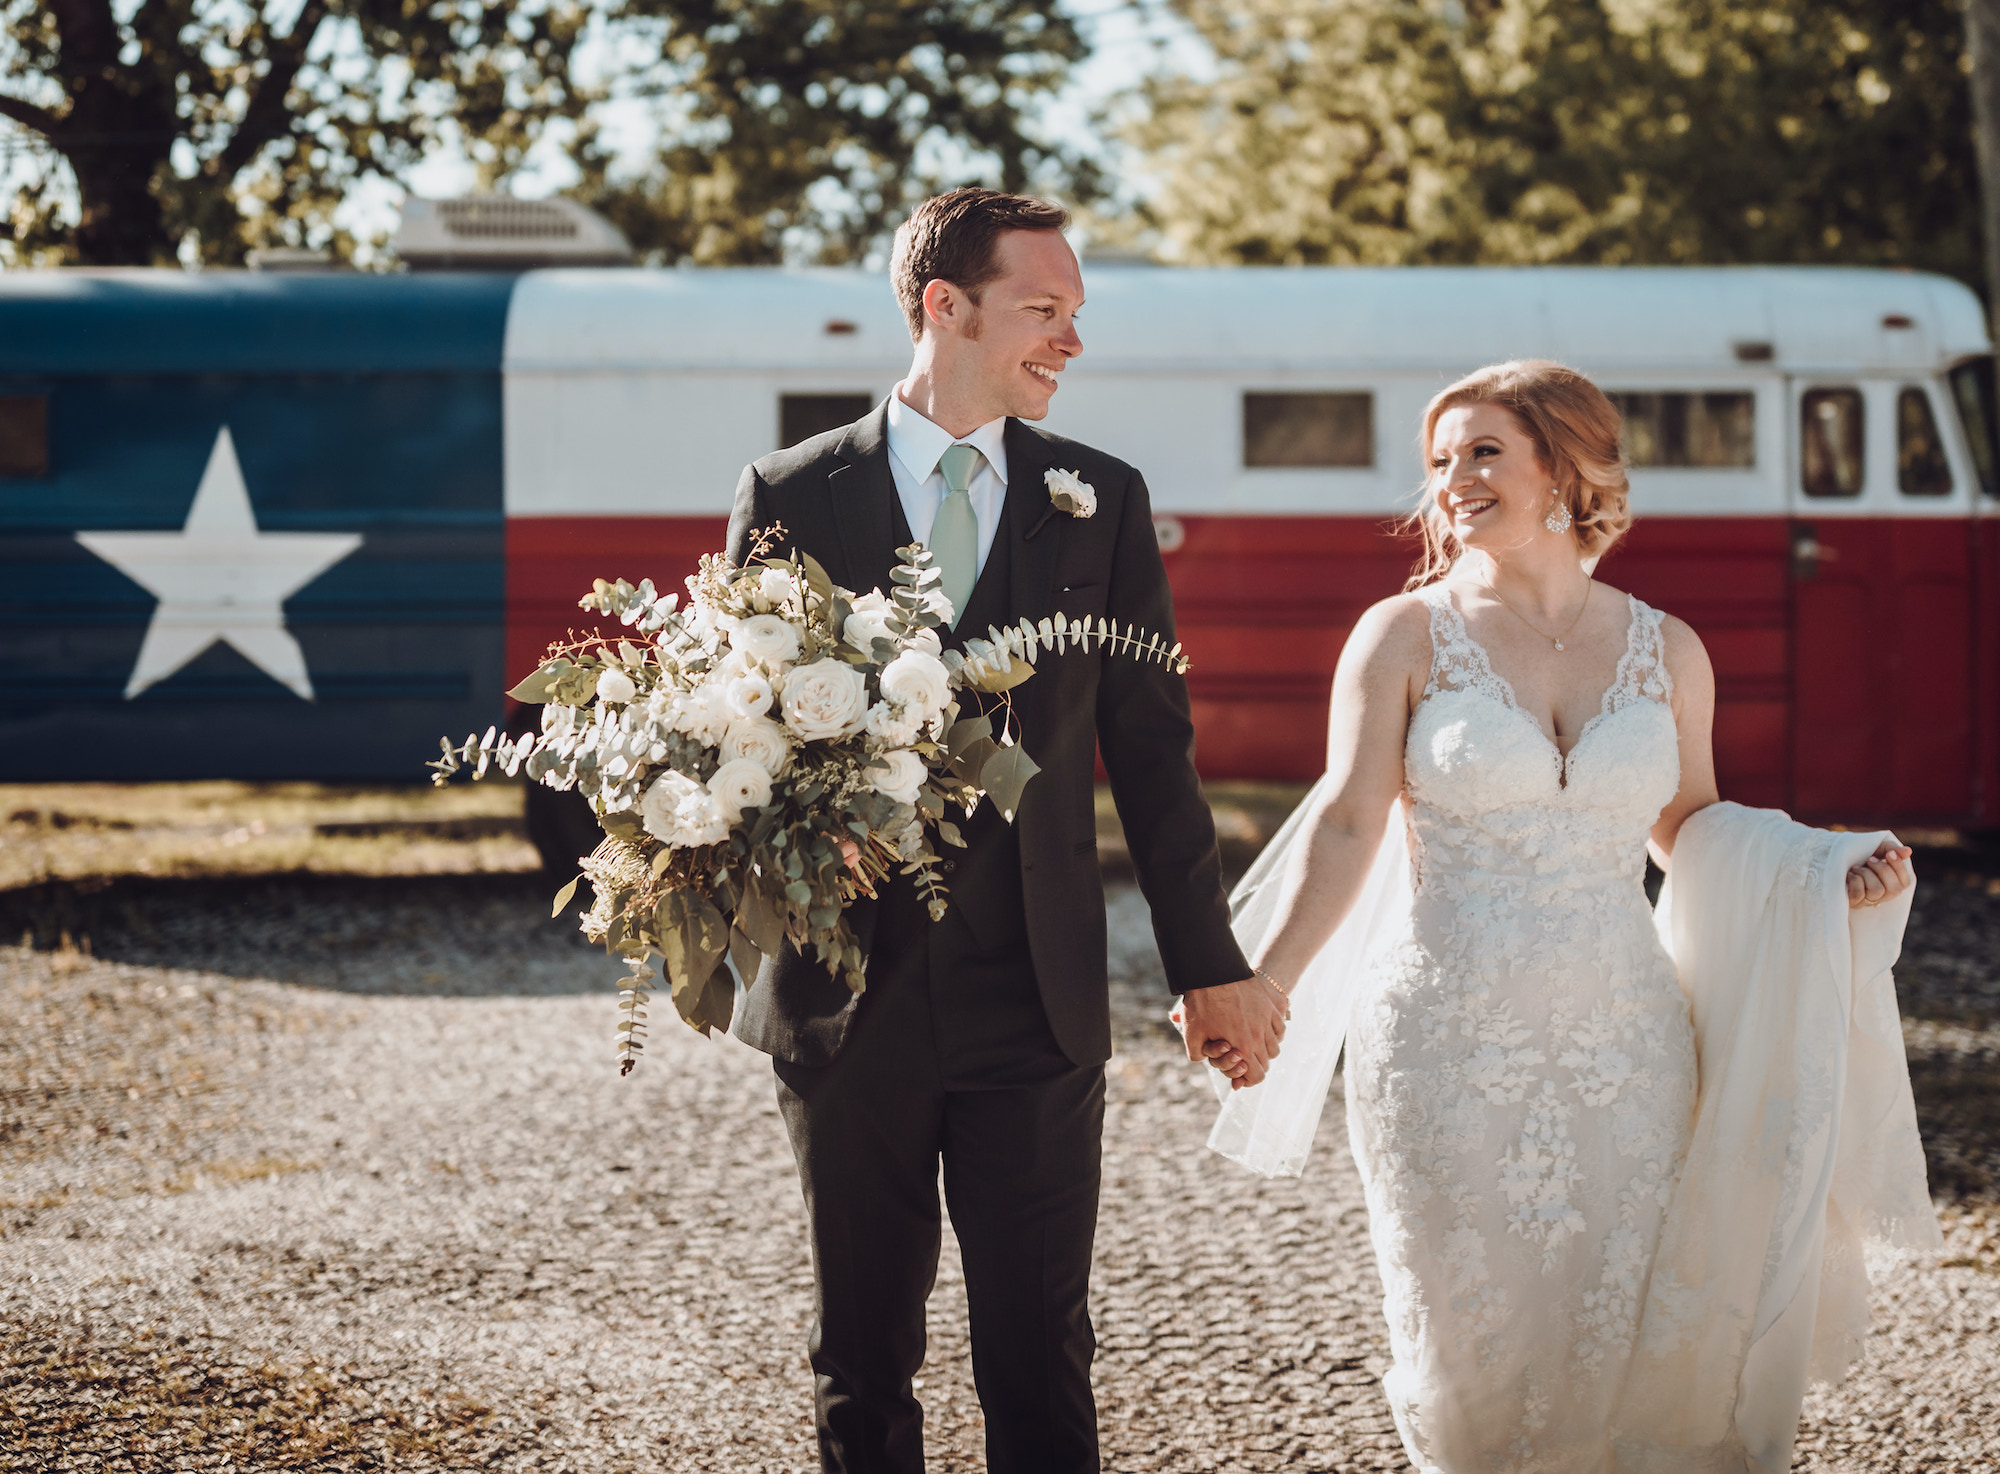 A bride and groom holds hands and walk in front of a school bus painted as a TX flag.